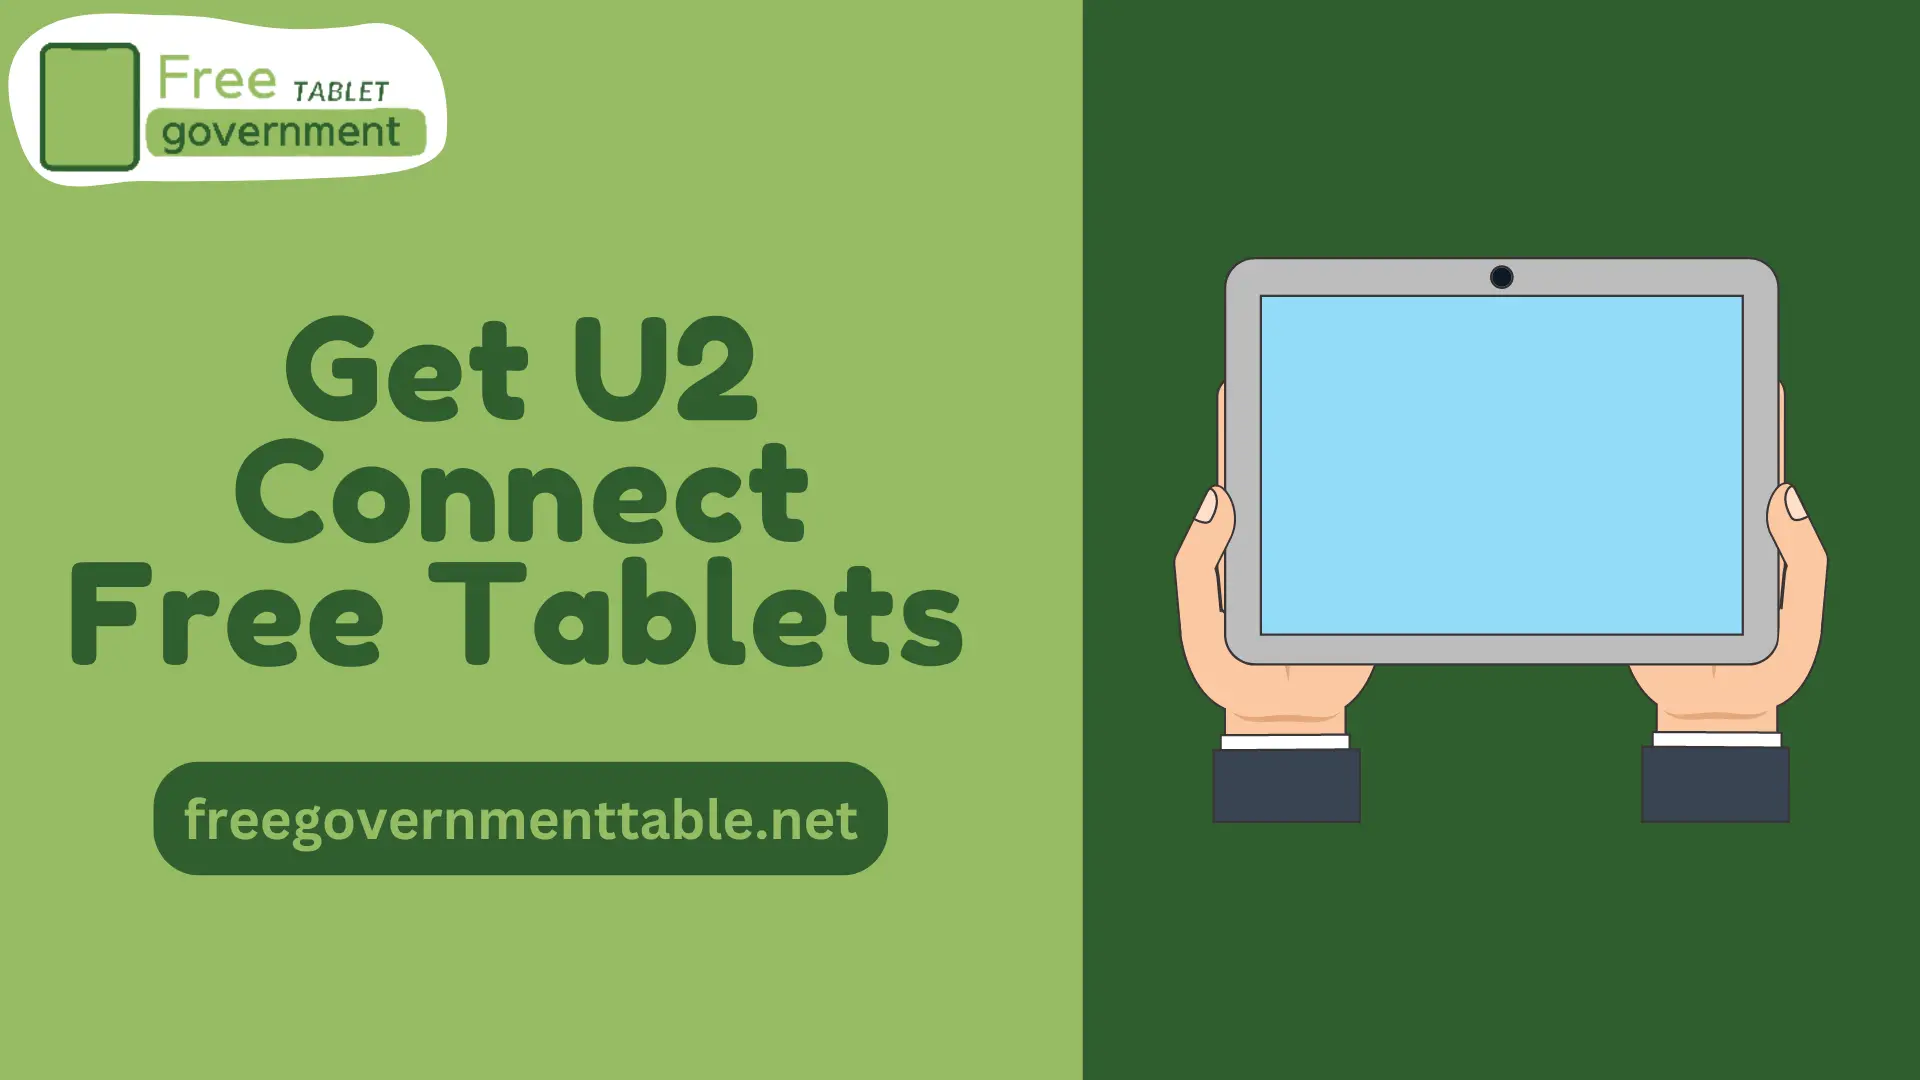 How to Get U2 Connect Free Tablets 